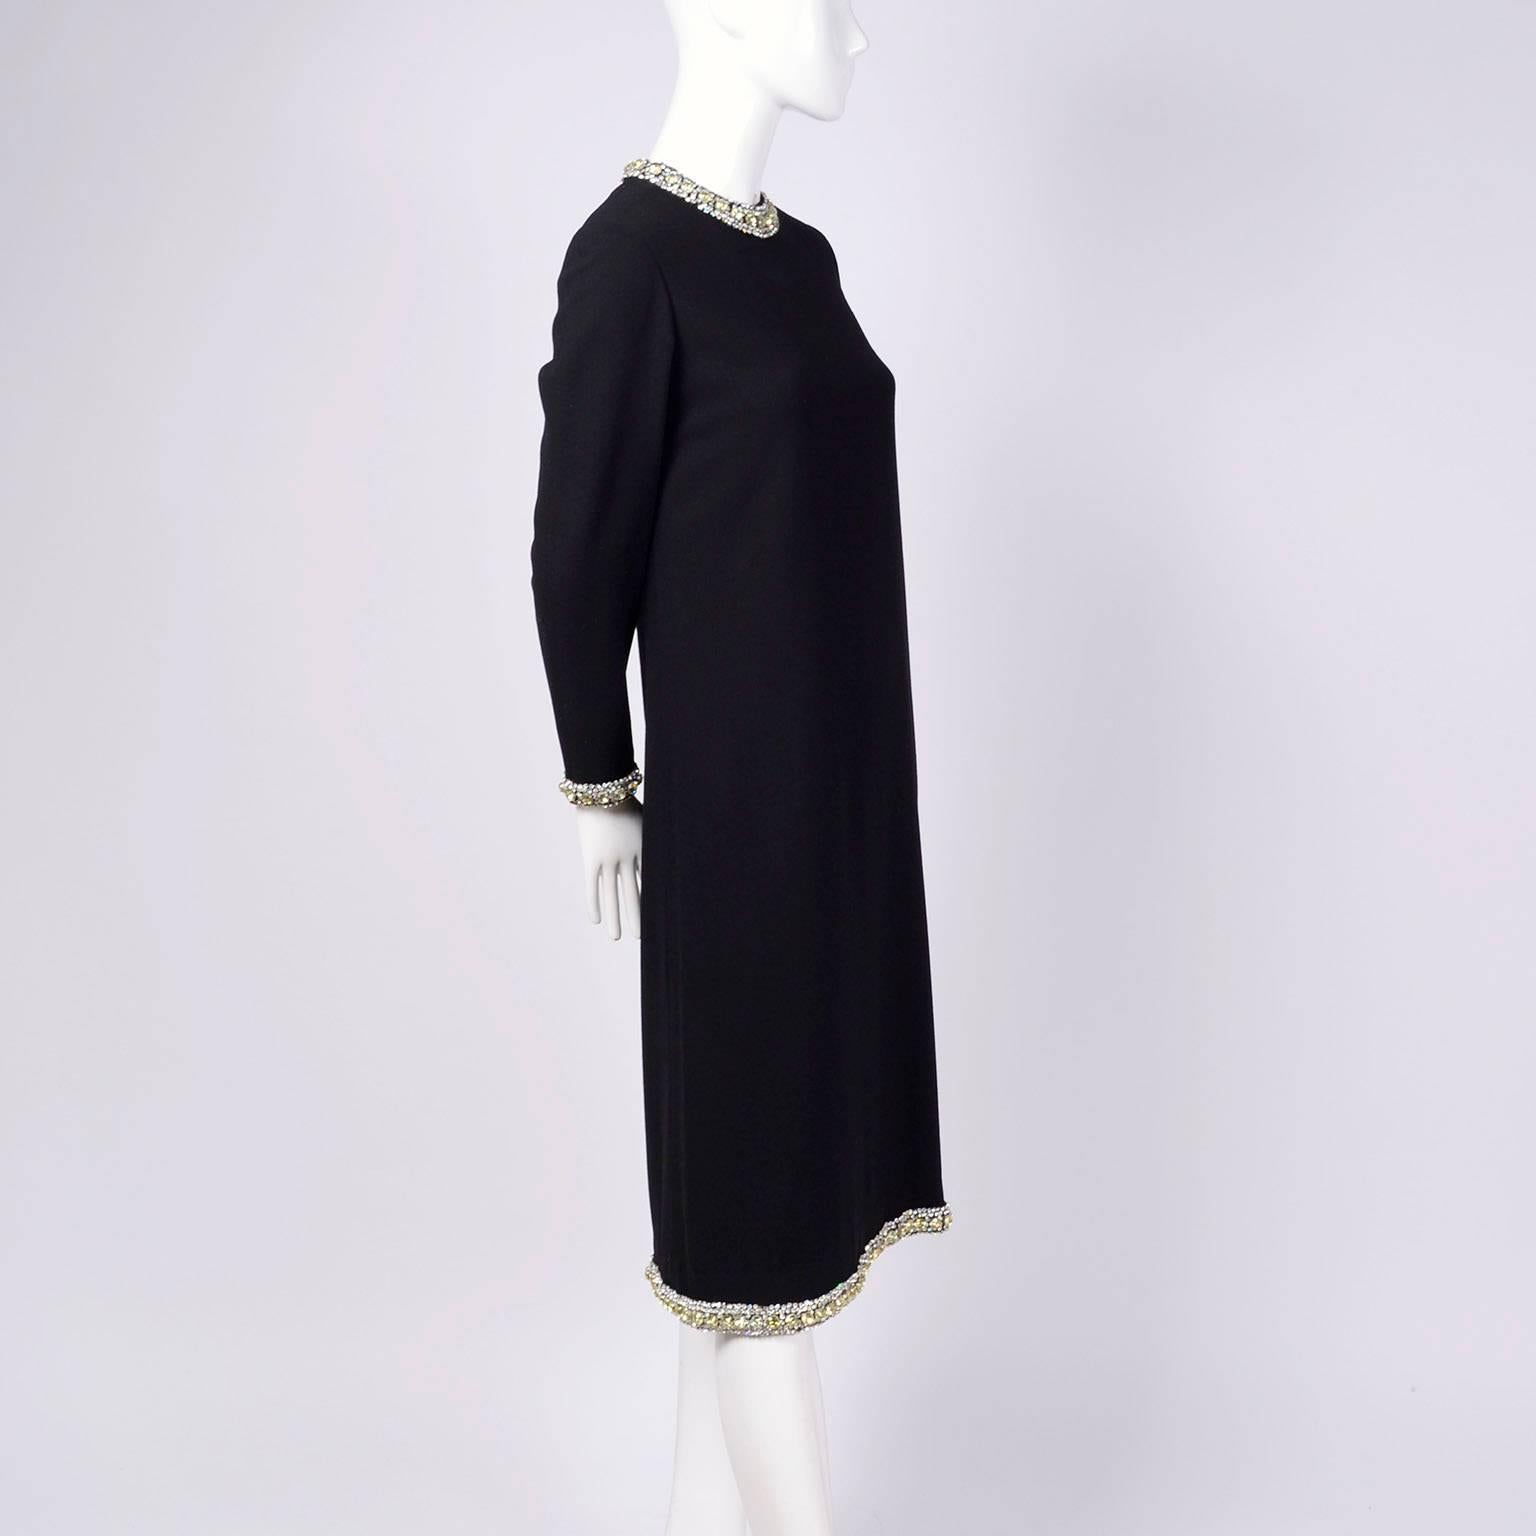 1960s Norman Norell Dress in Black Crepe With Rhinestones and Yellow ...